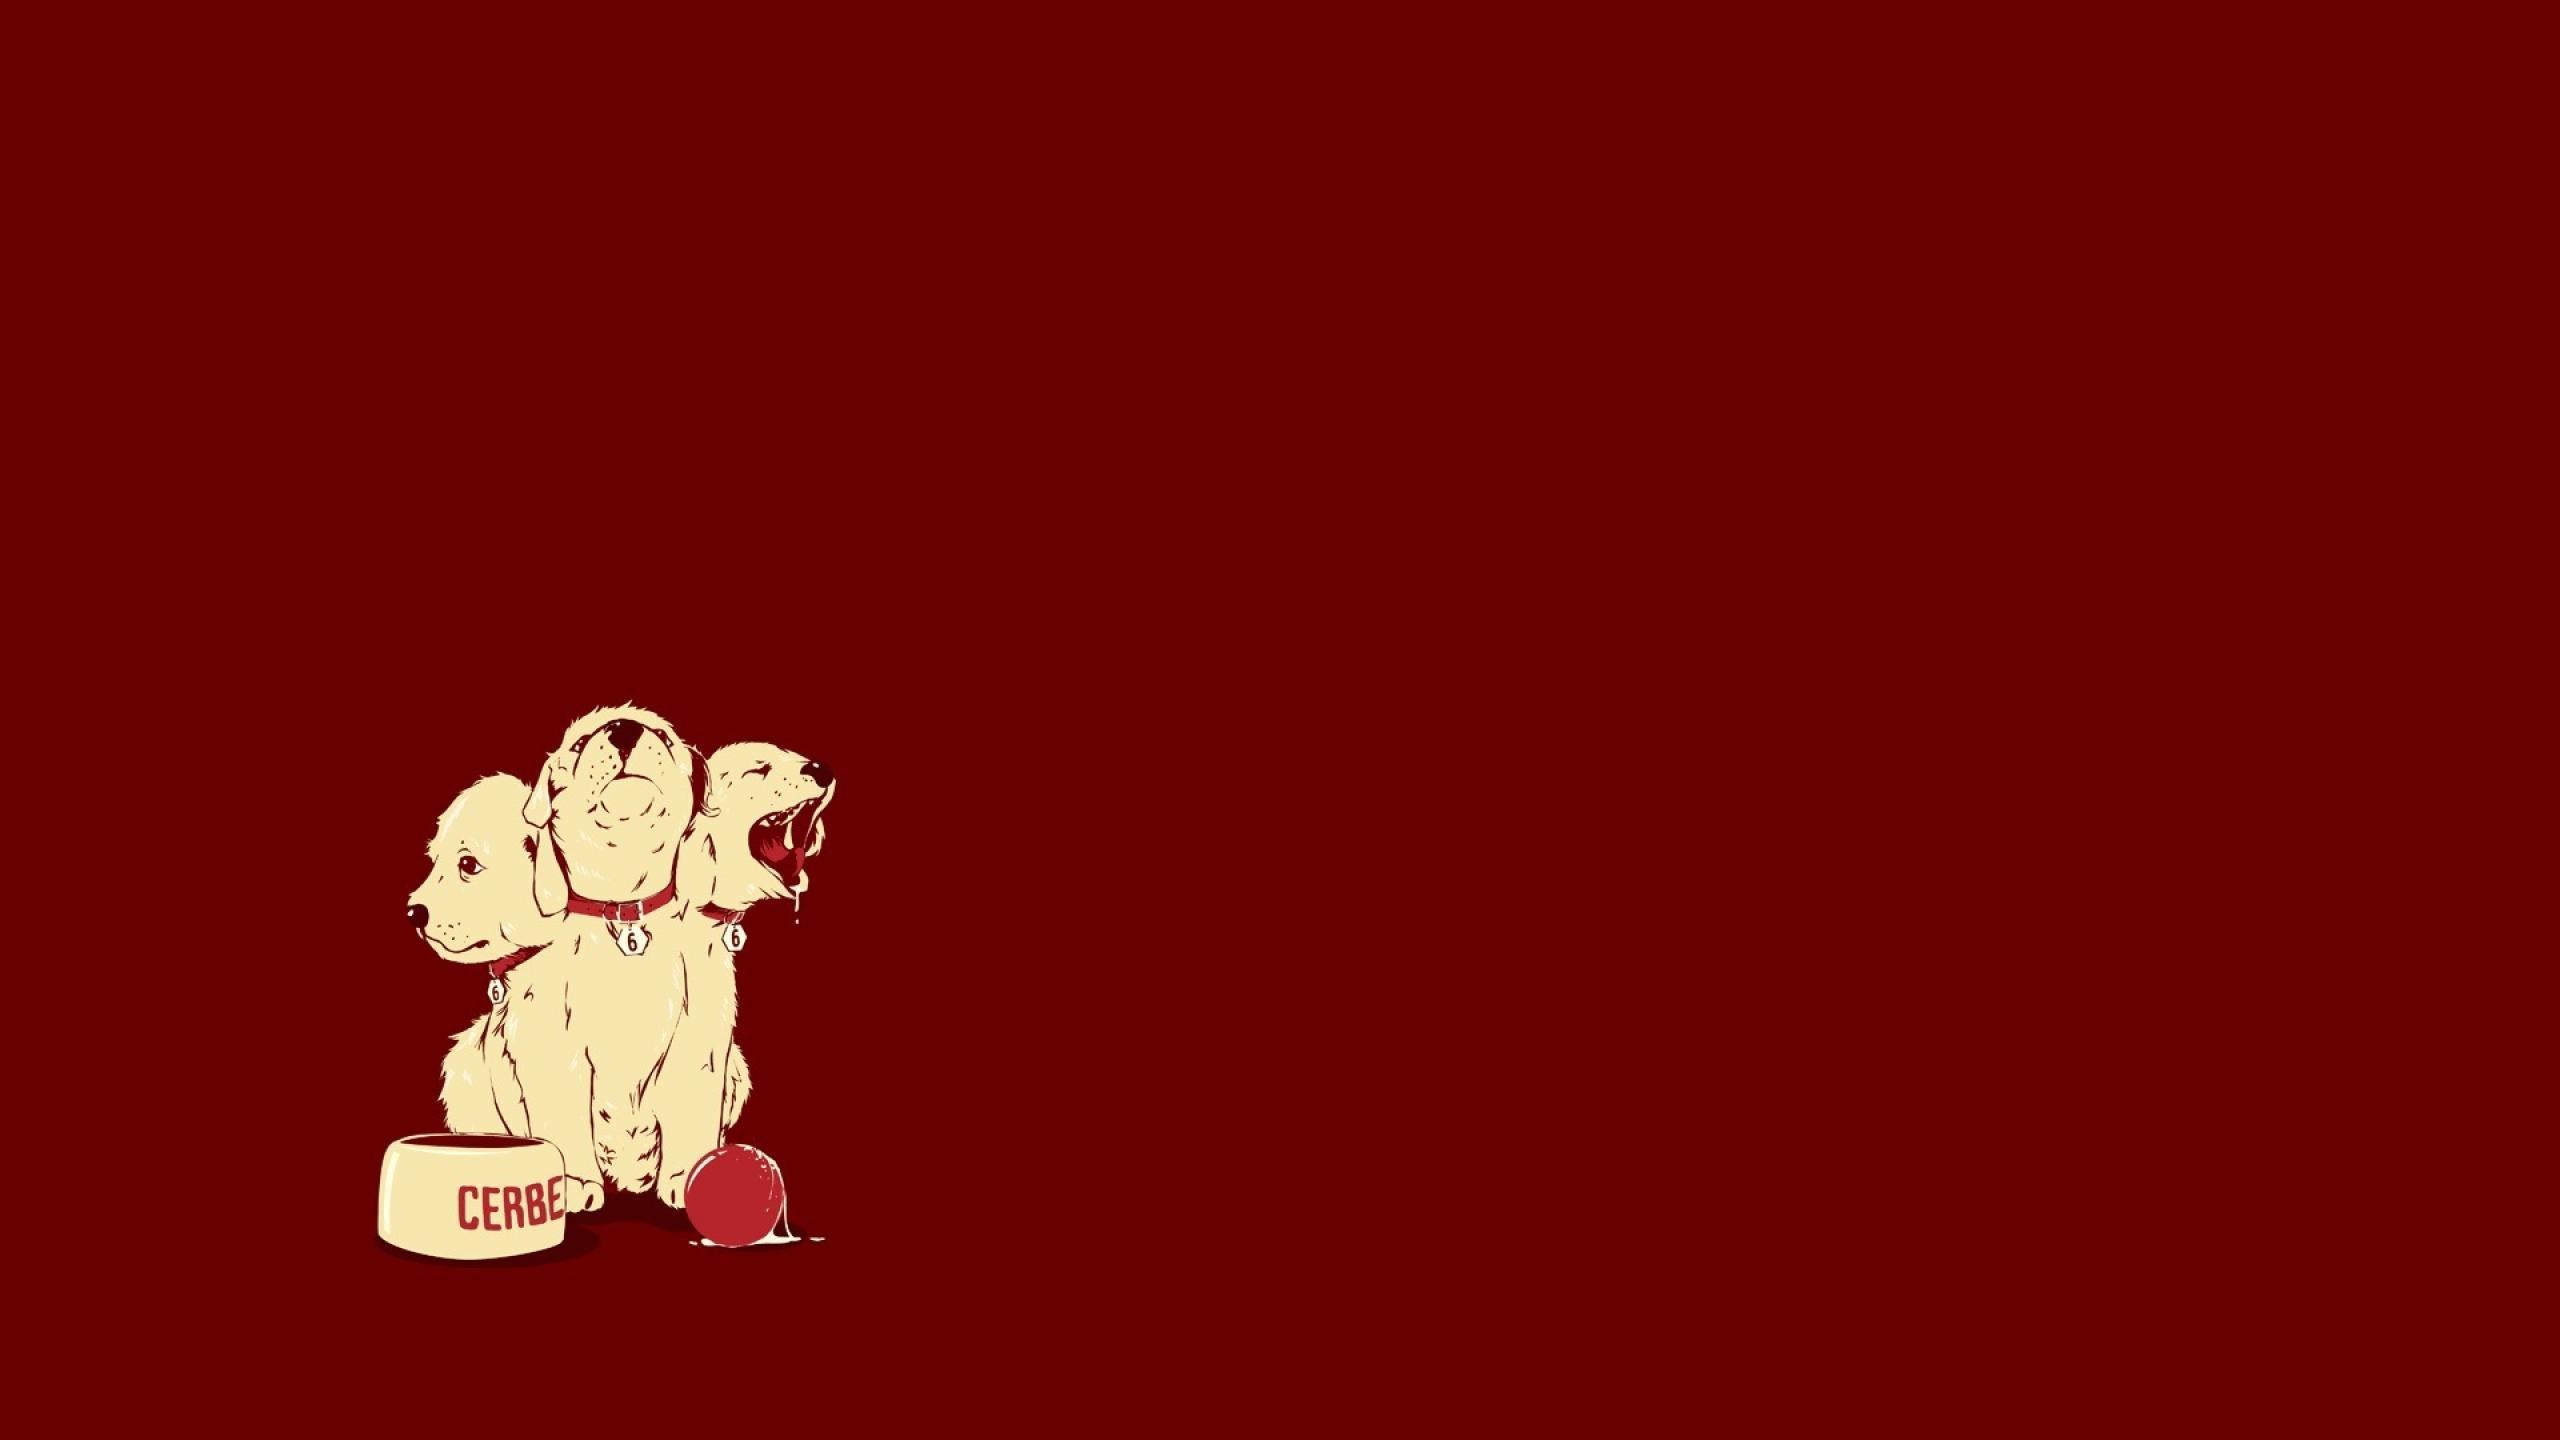 Cerberus Puppies Dog Red Background Simple Background 2560x1440